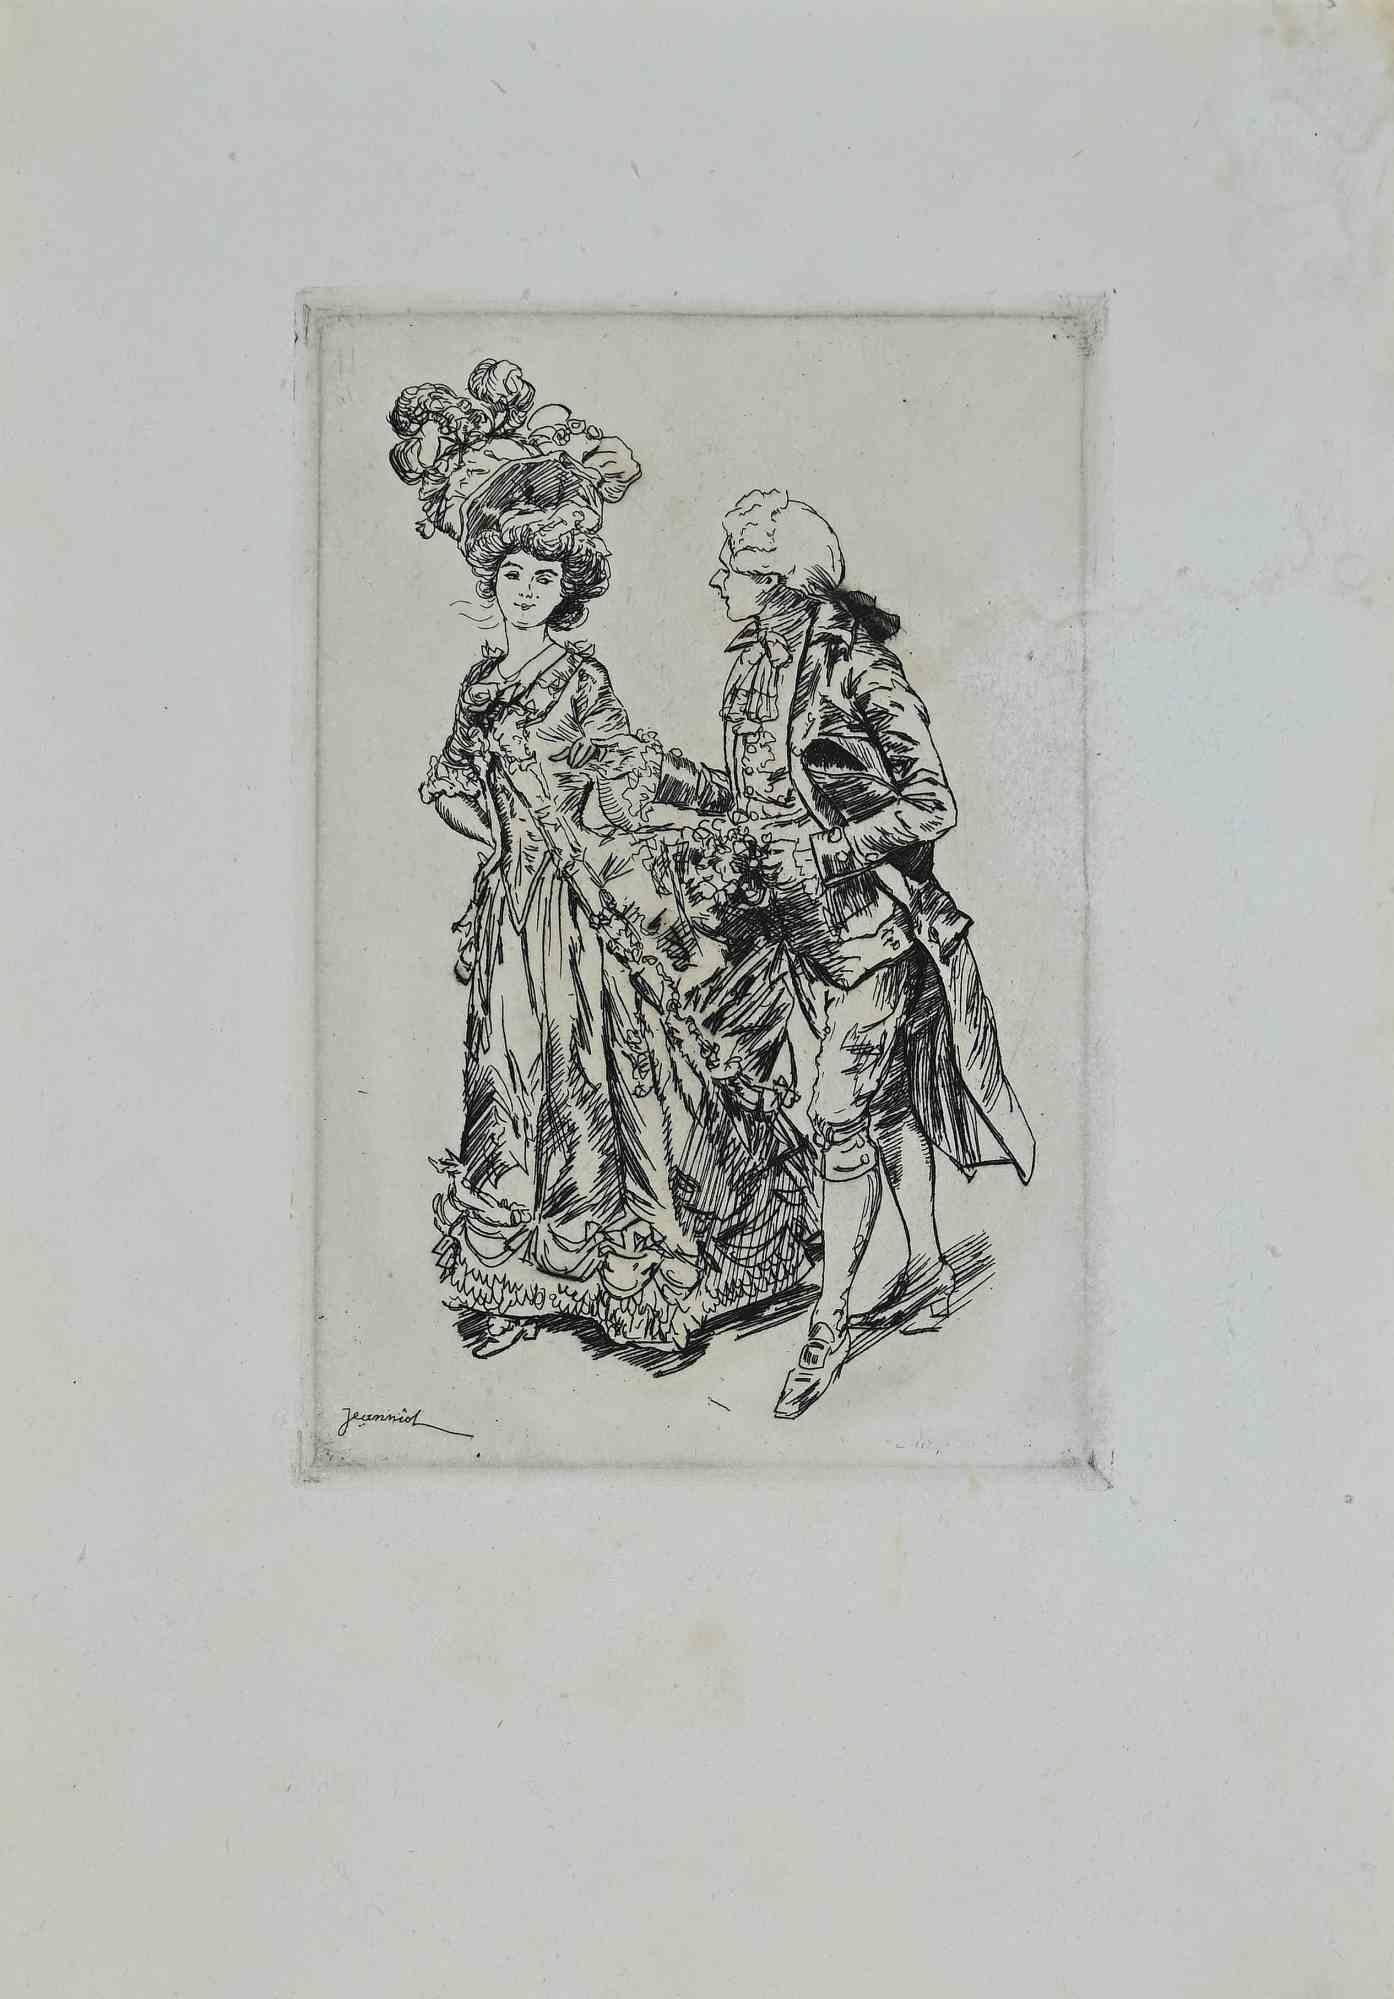 Pierre Georges Jeanniot Figurative Print - Scene from The Life of Casanova - Etching by G. Jeanniot - Early 20th Century